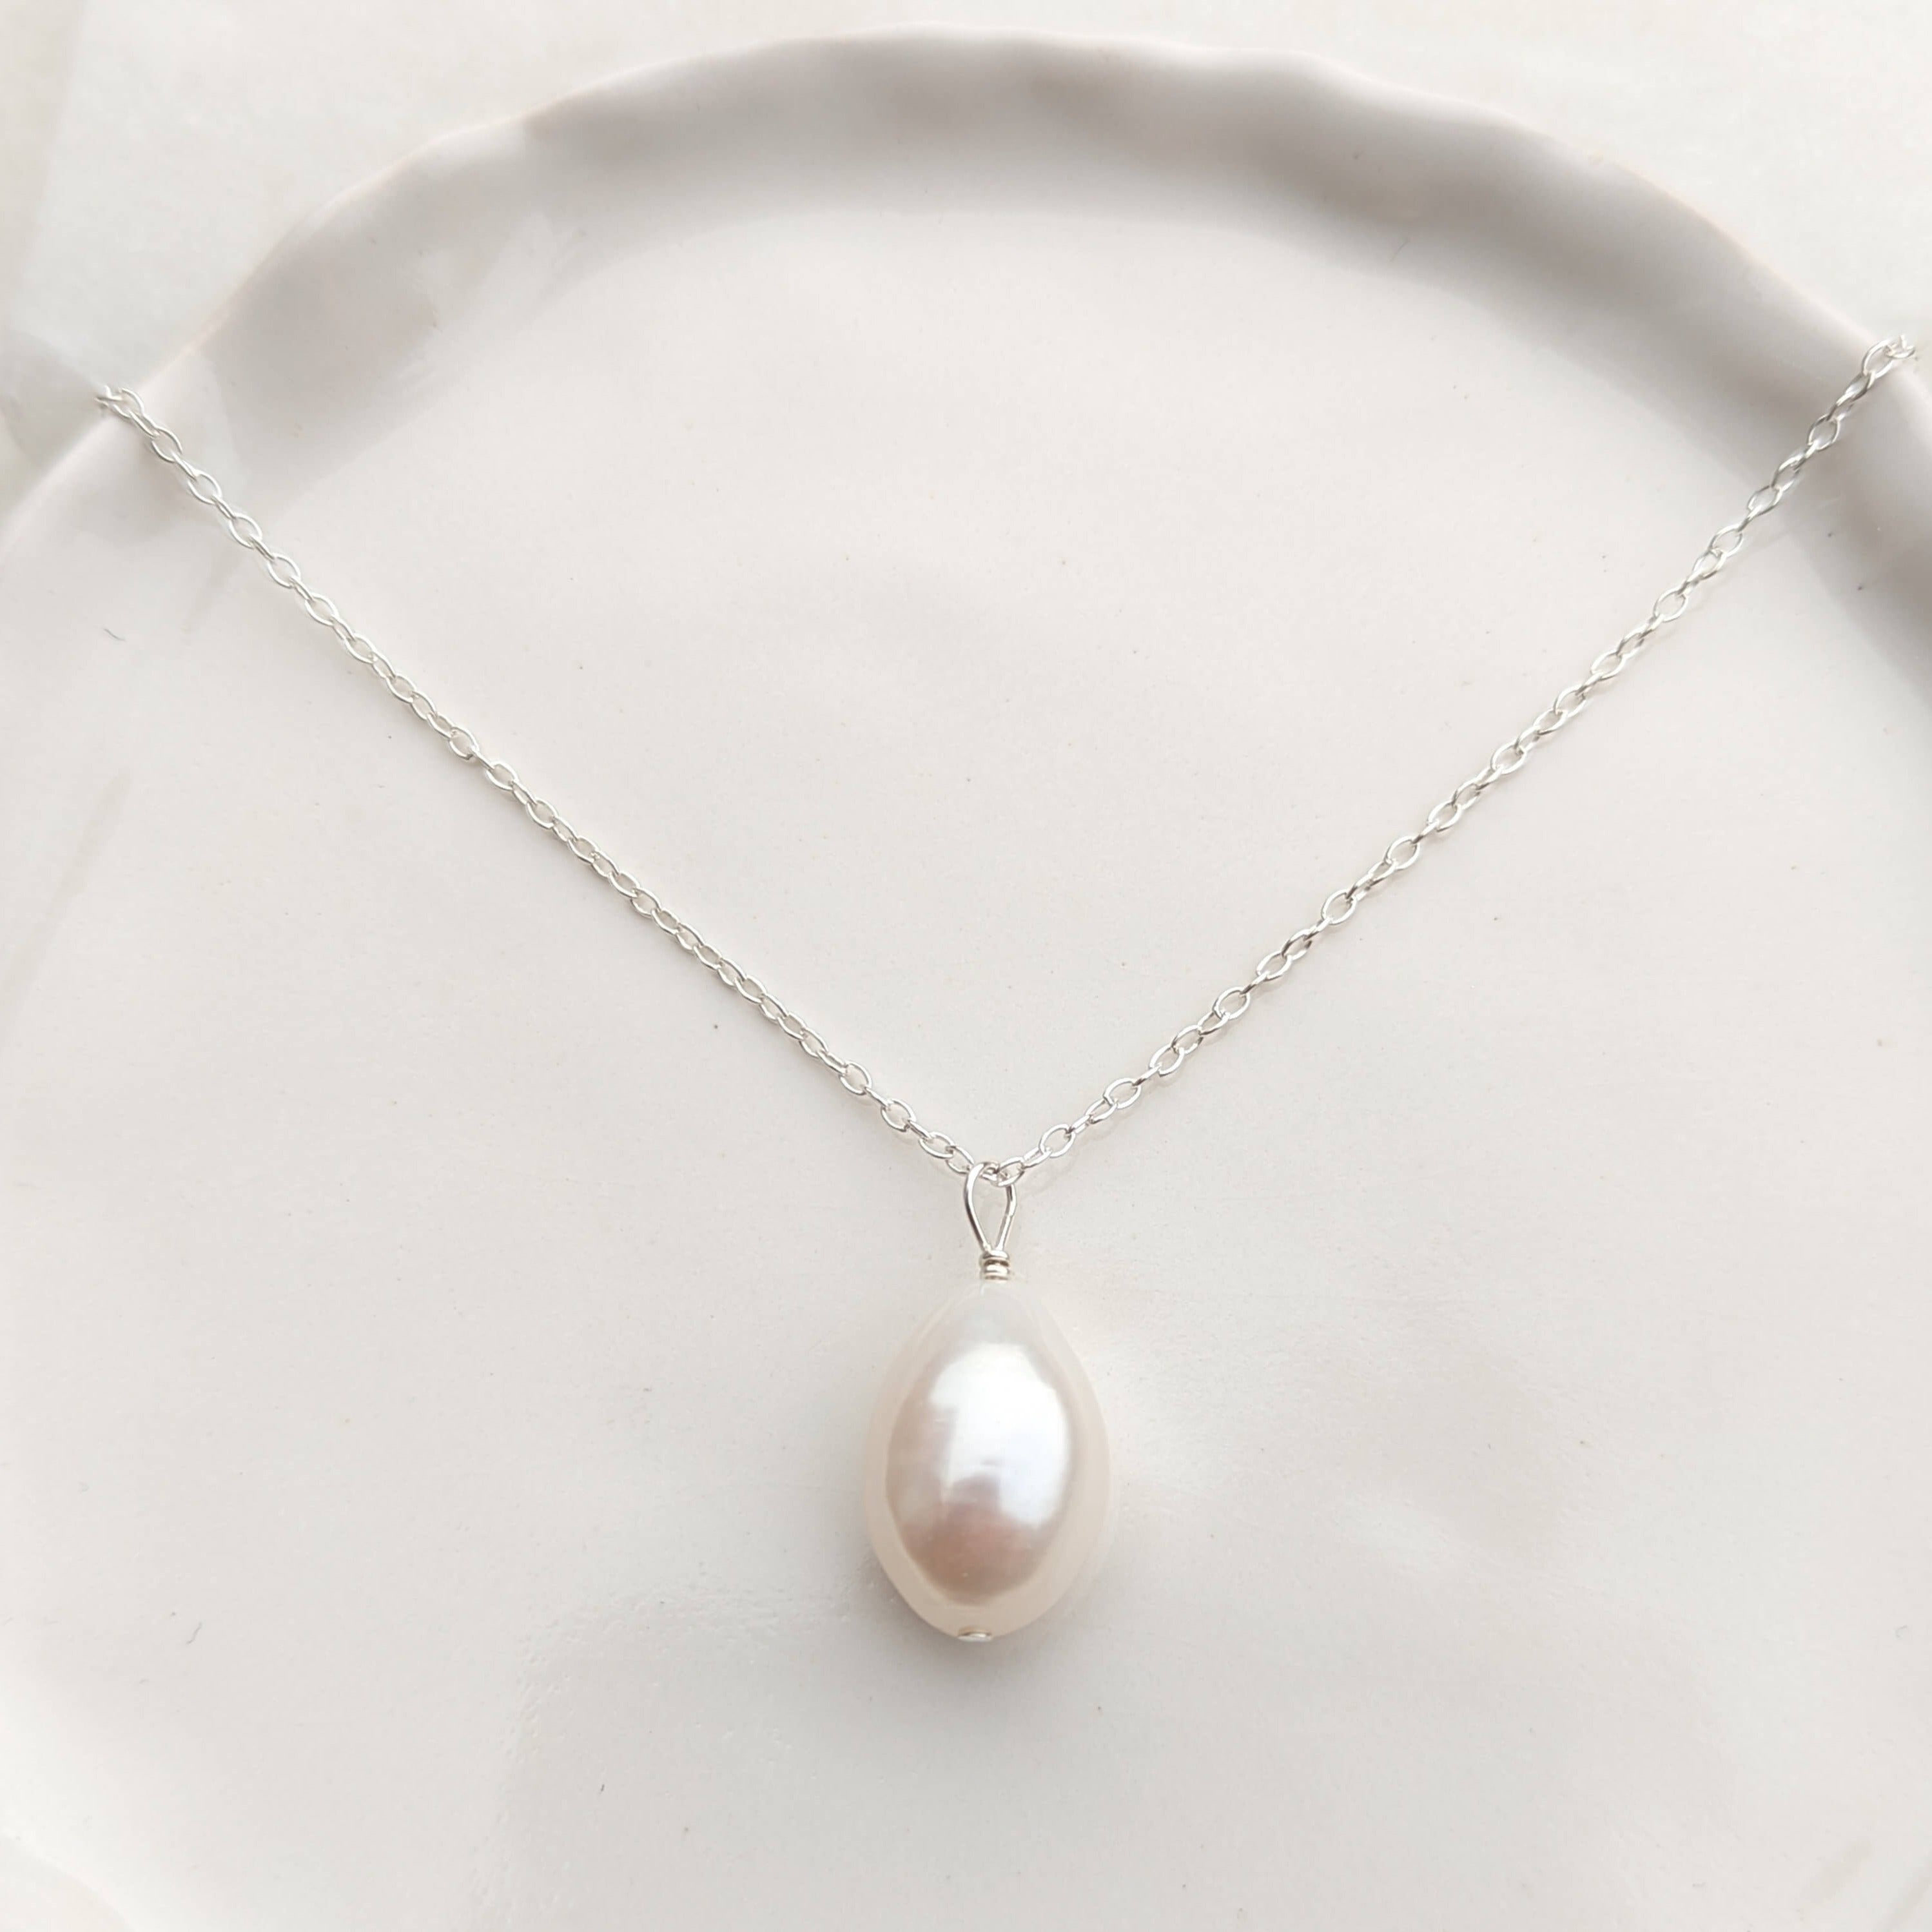 Baroque pearl pendant necklace in sterling silver